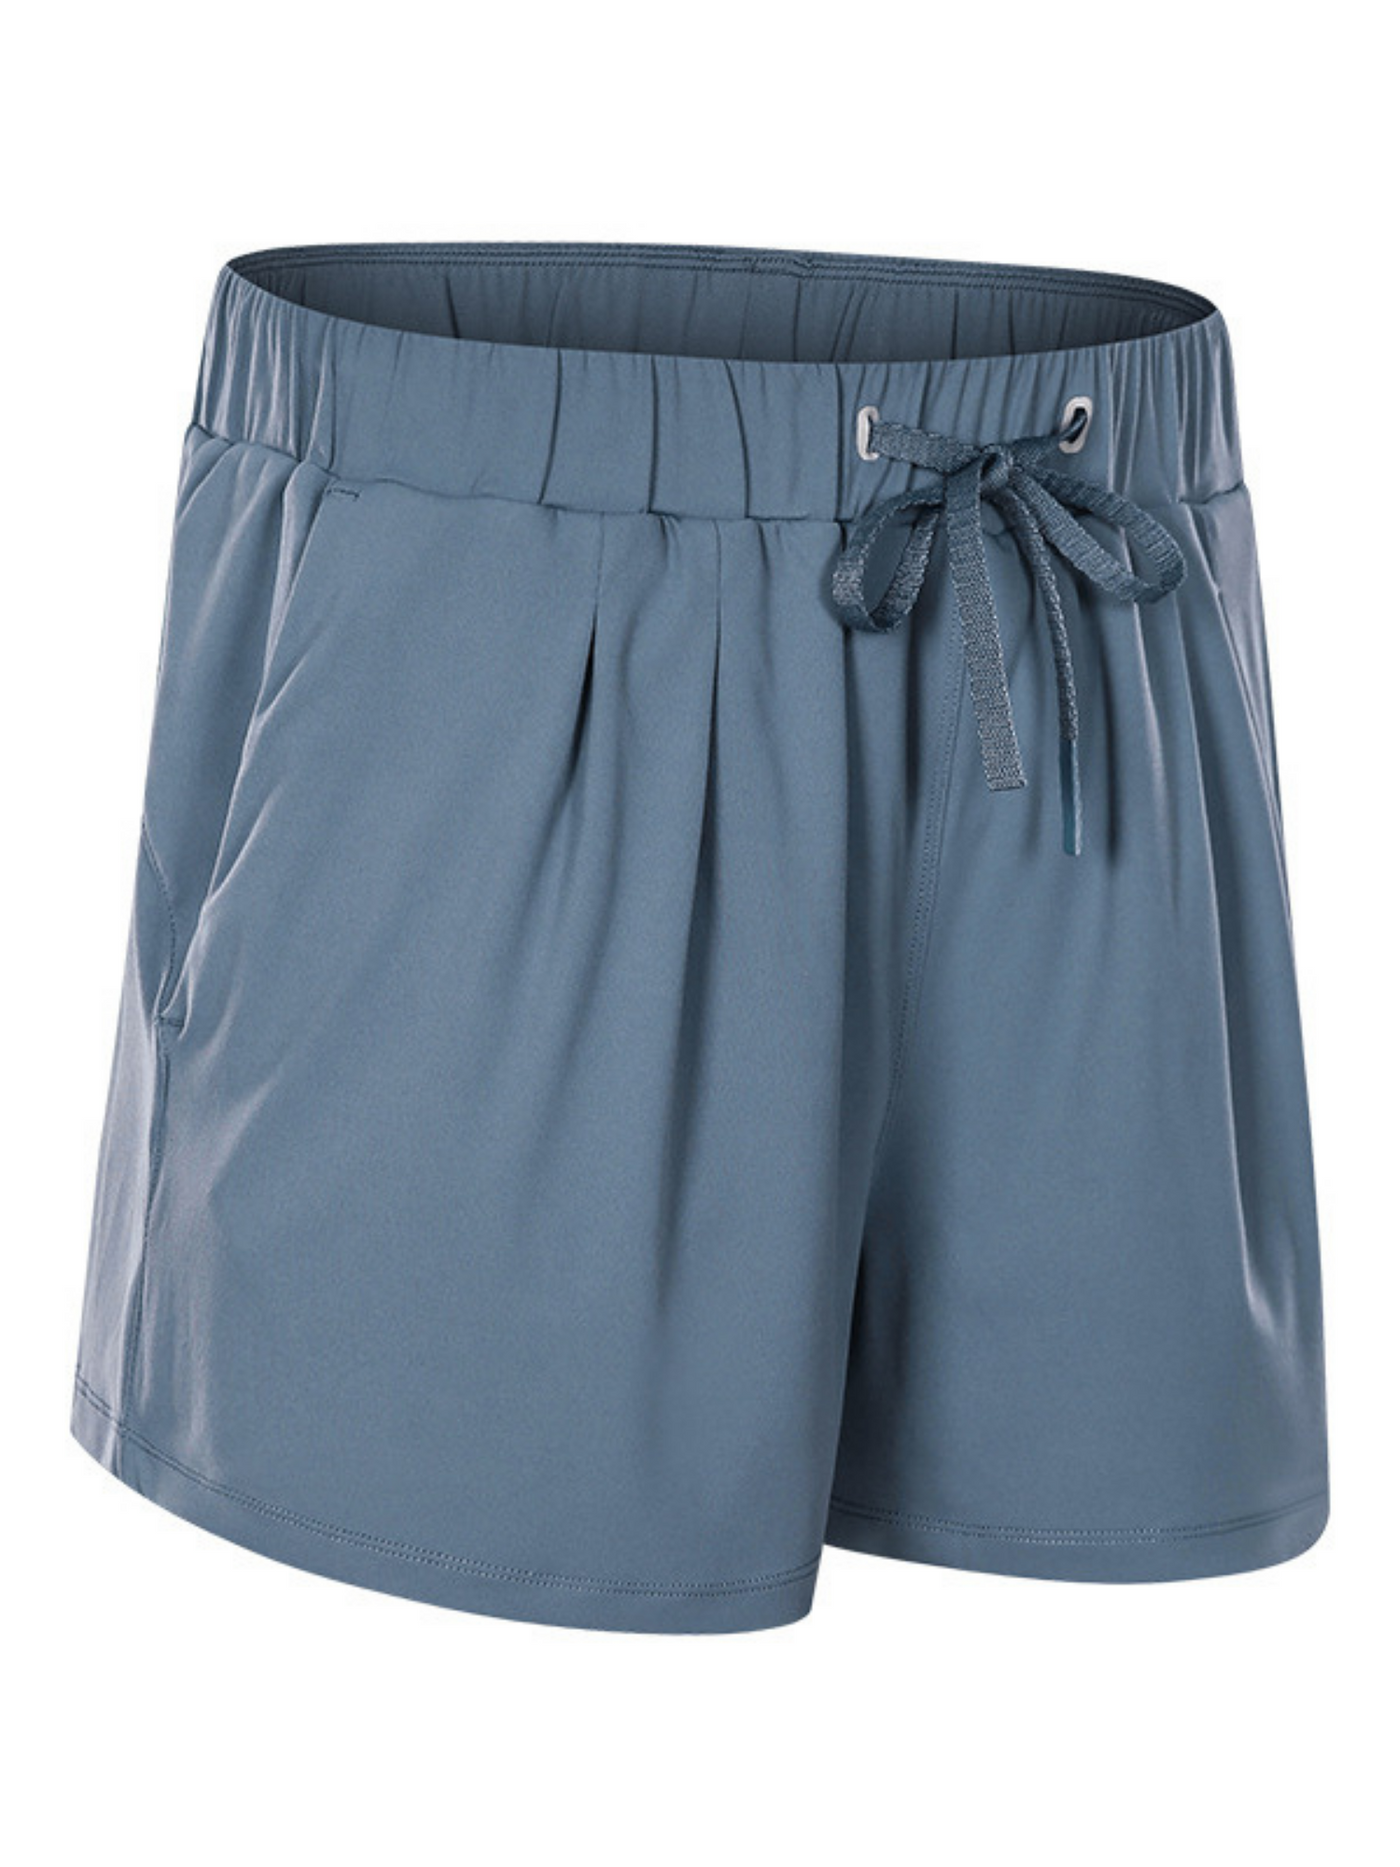 Pitch Blue "Alice" Relaxed Fit Classic Drawstring Everyday Shorts